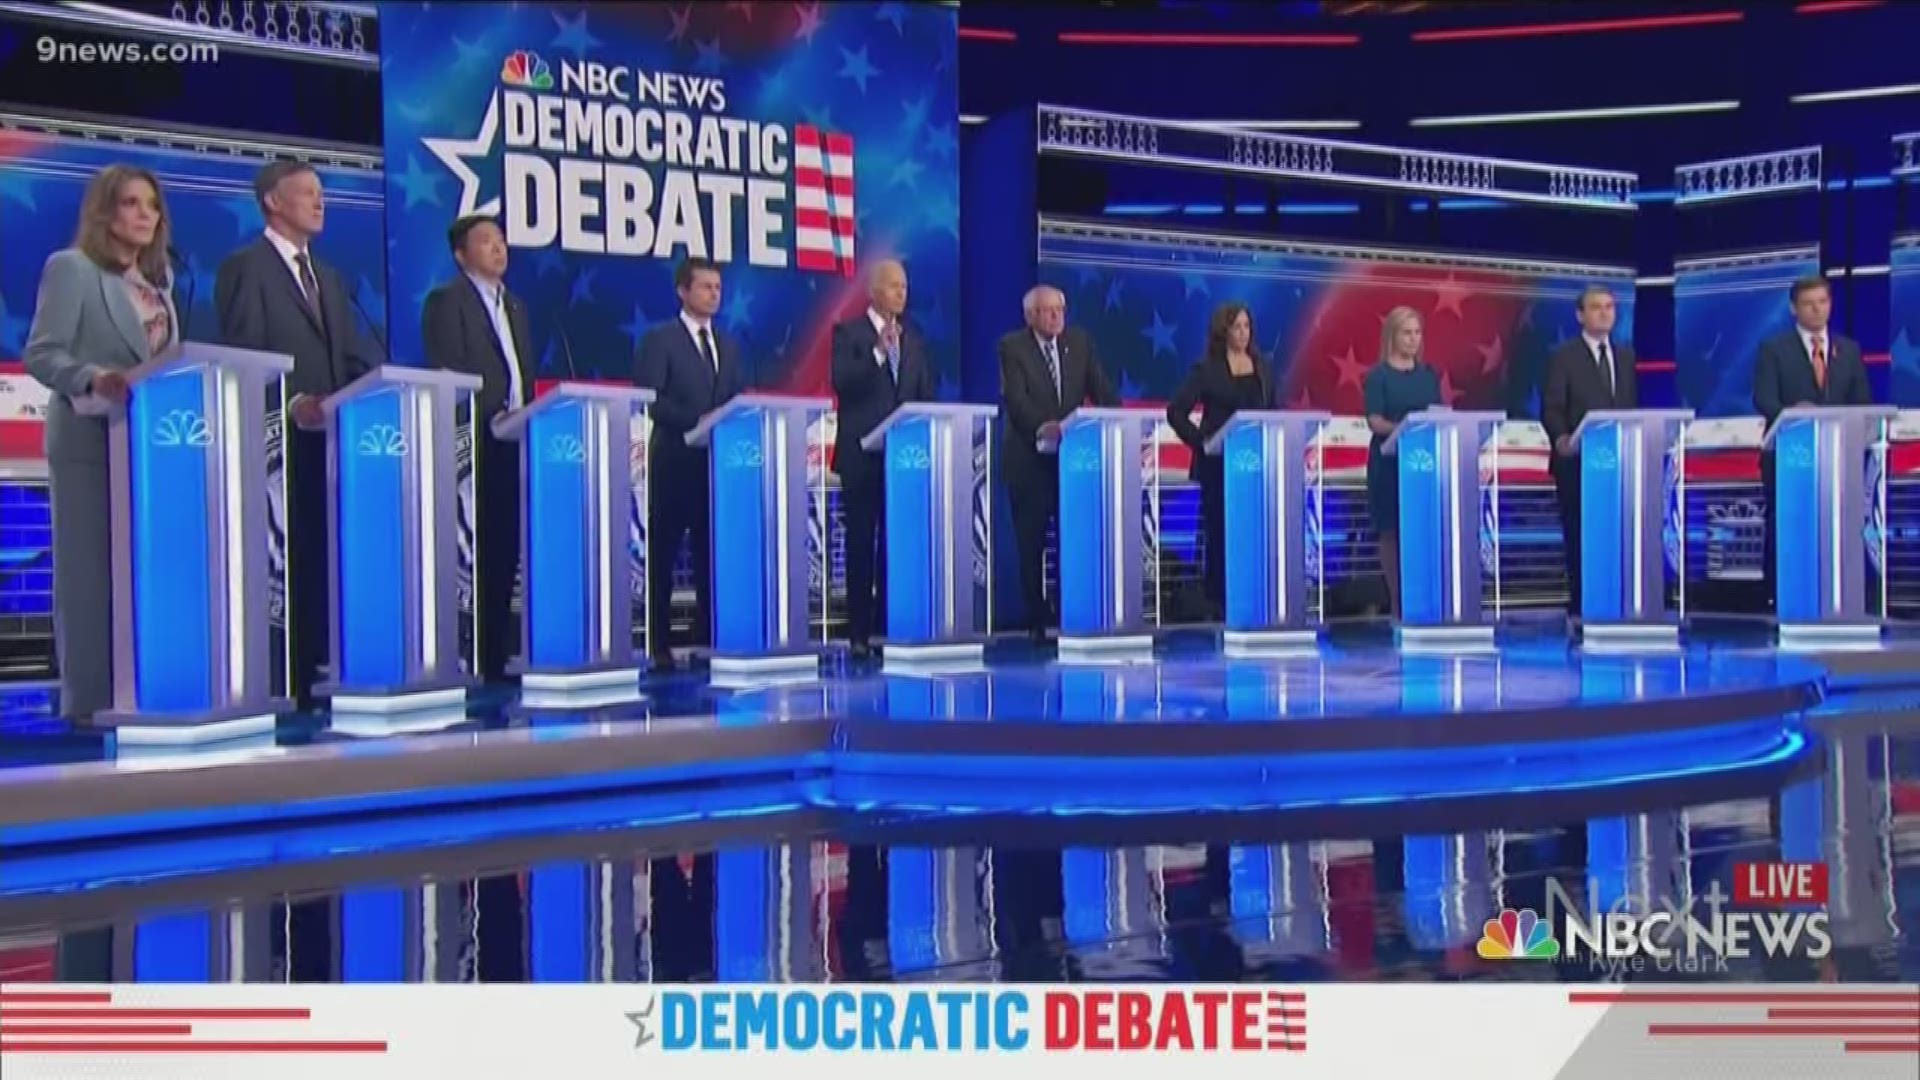 Following the rules was not on the agenda when 20 Democrats hoping to take the White House in 2020 debated, bickered and went over time during the Democratic presidential debate